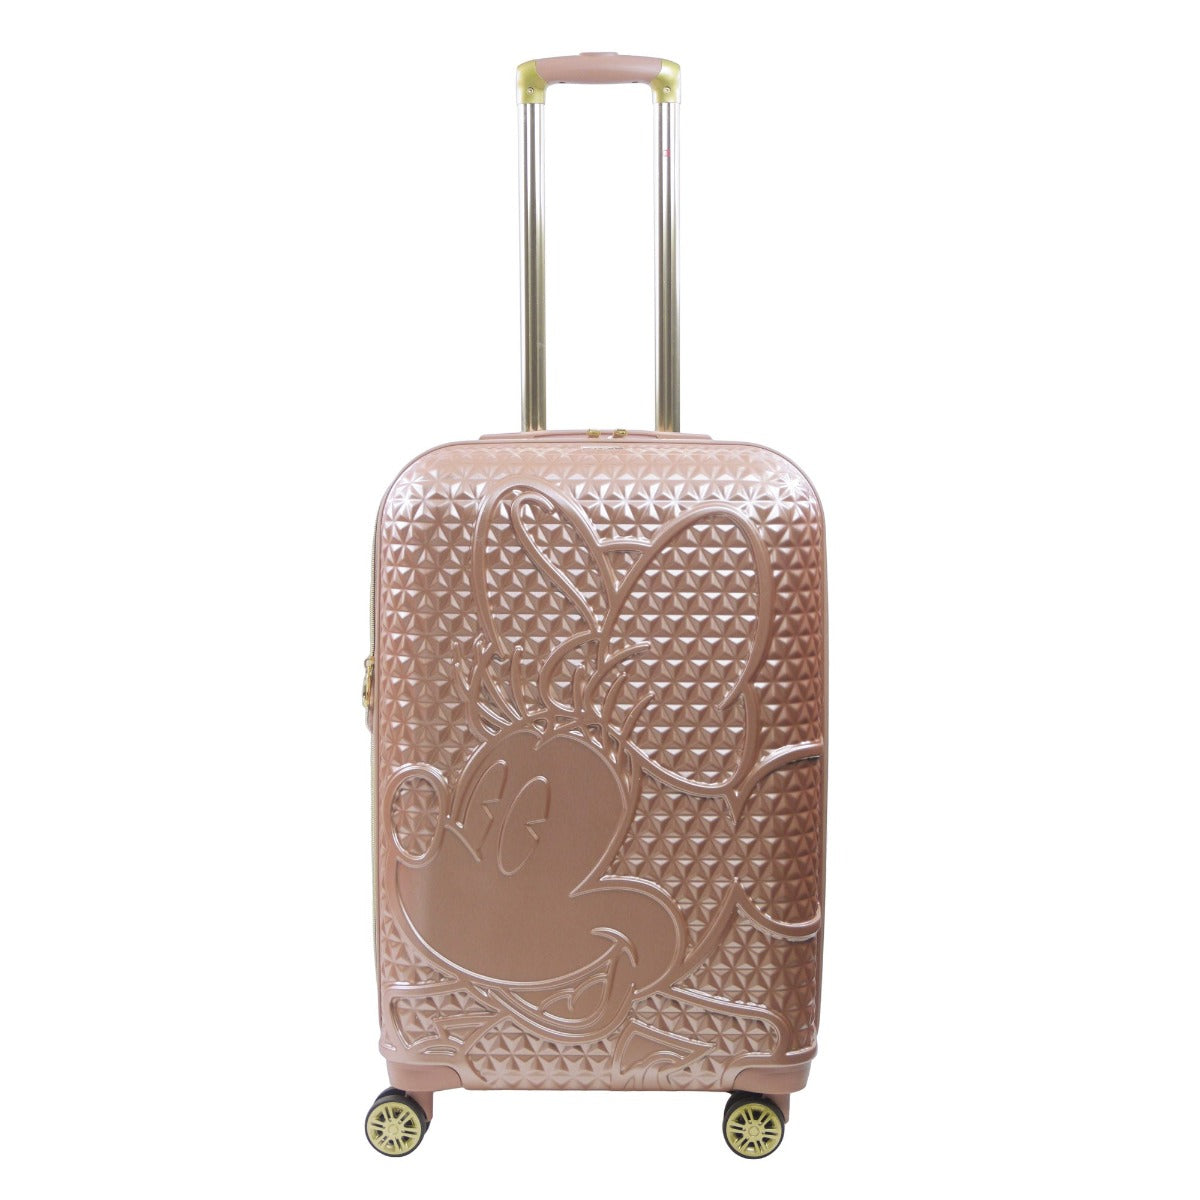 Ful Disney Minnie Mouse 25" luggage spinner rose gold - best hardshell suitcase for traveling